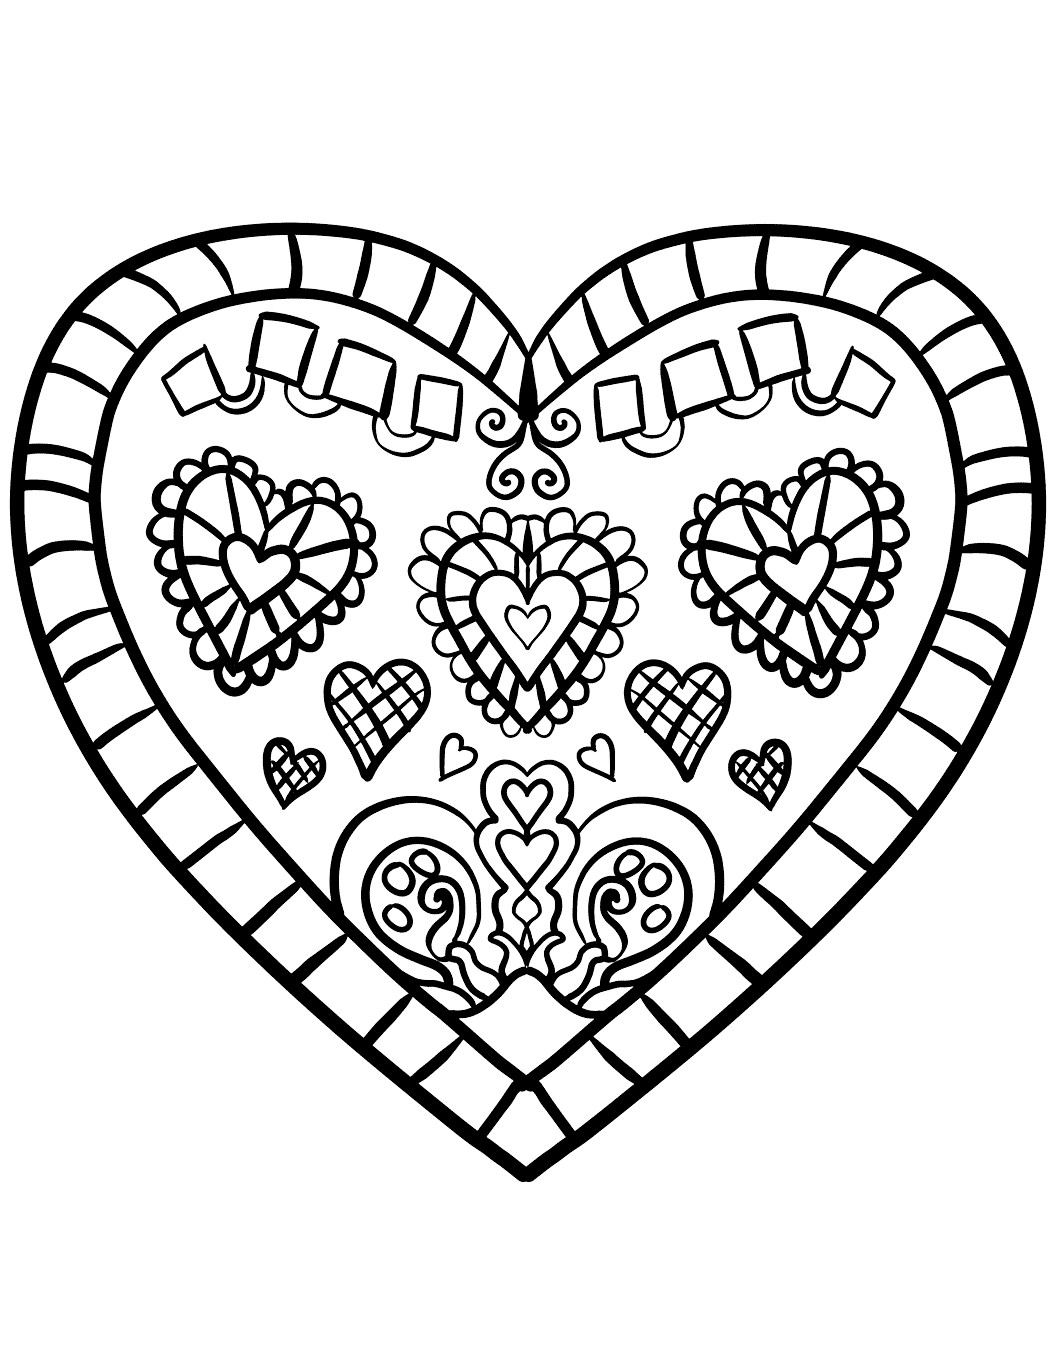 Free Printable Heart Coloring Pages
 Hearts Coloring Pages for Adults Best Coloring Pages For